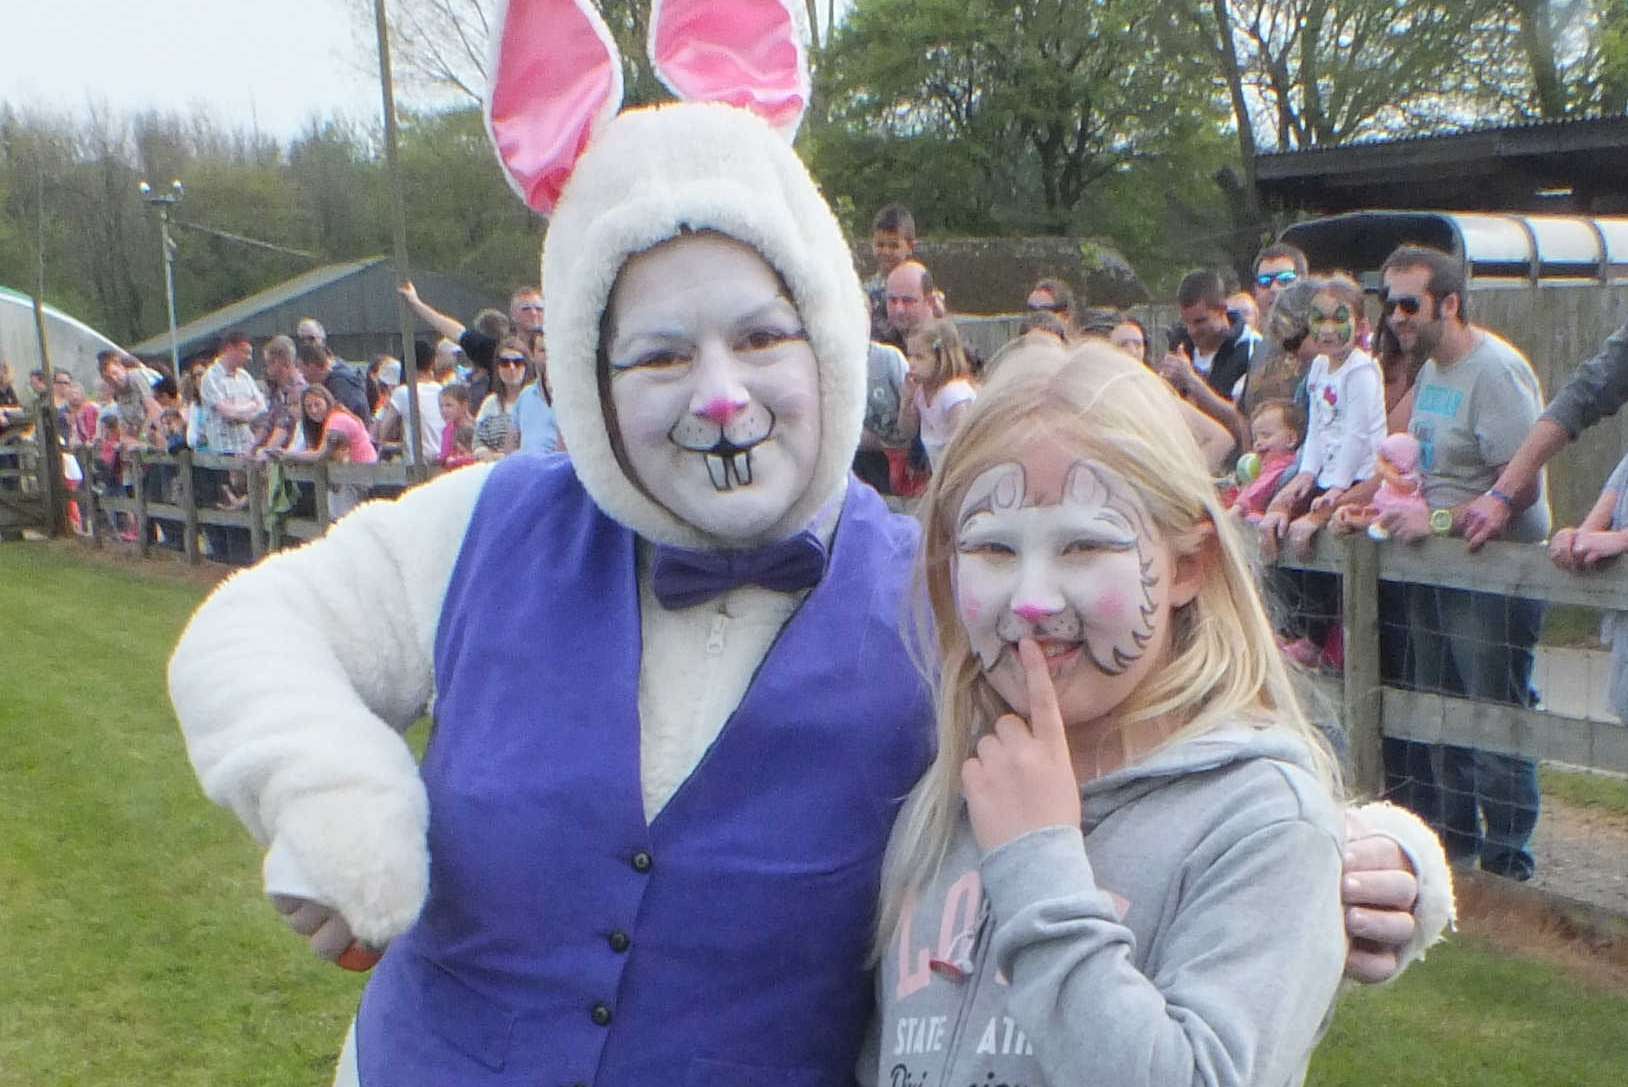 Face painting will be available over Easter